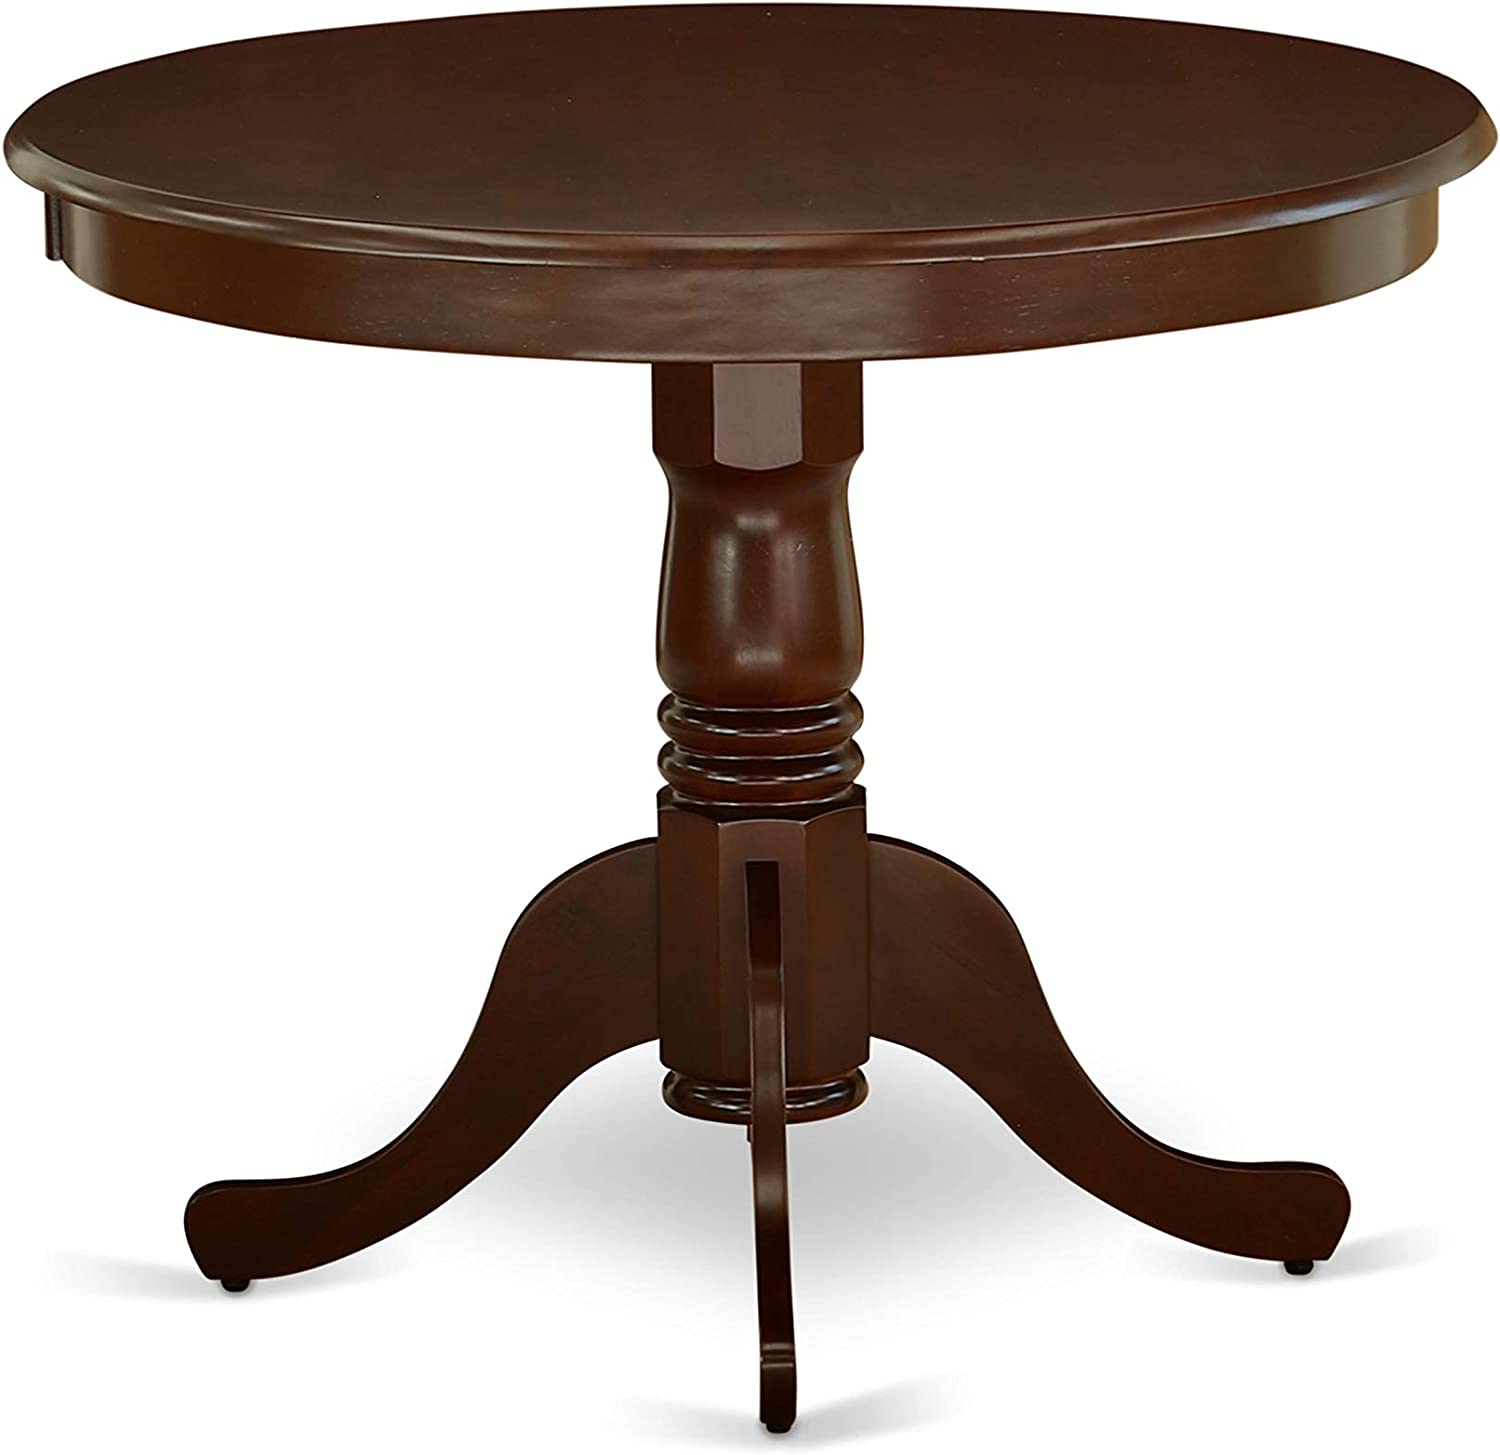 East West Furniture 3Pc Rounded 36 Inch Dinner Table And Two Wood Seat Dining Chairs, Mahogany